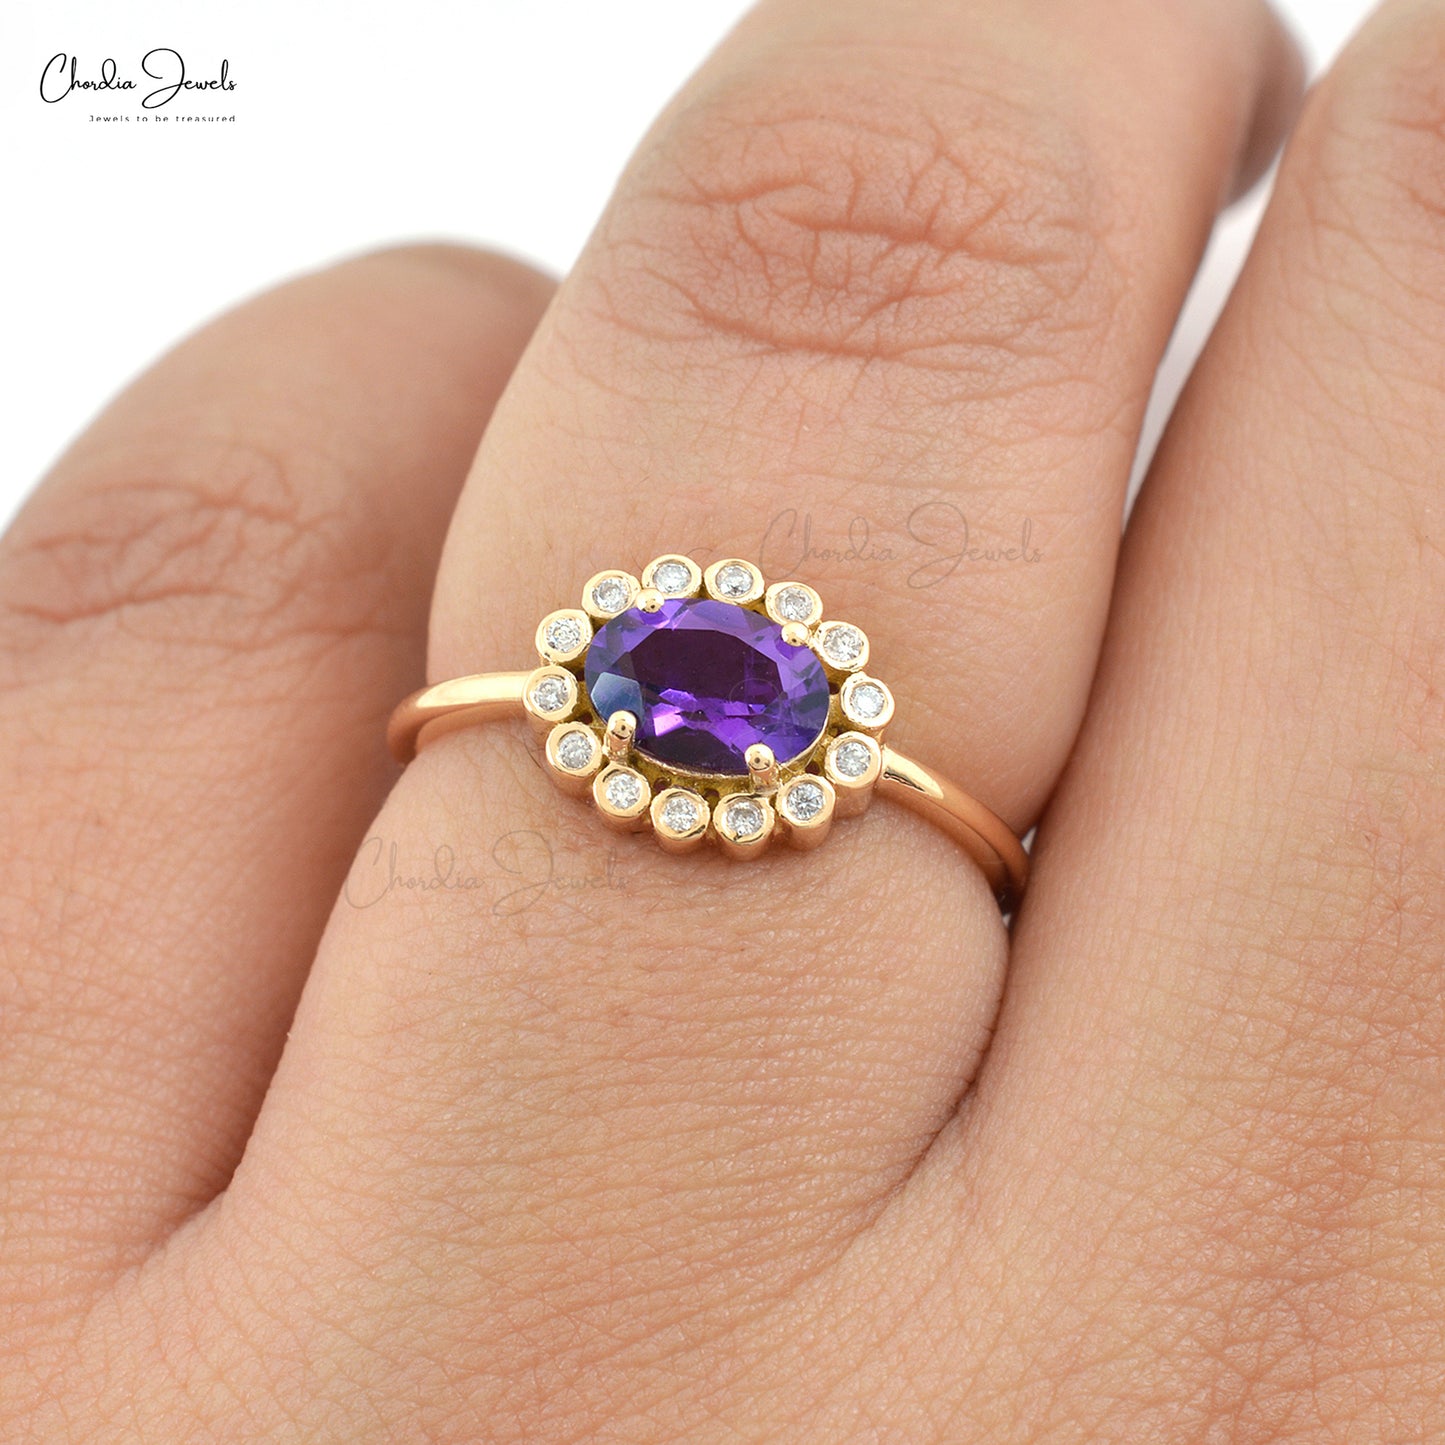 What should I look for in an amethyst ring? - Quora